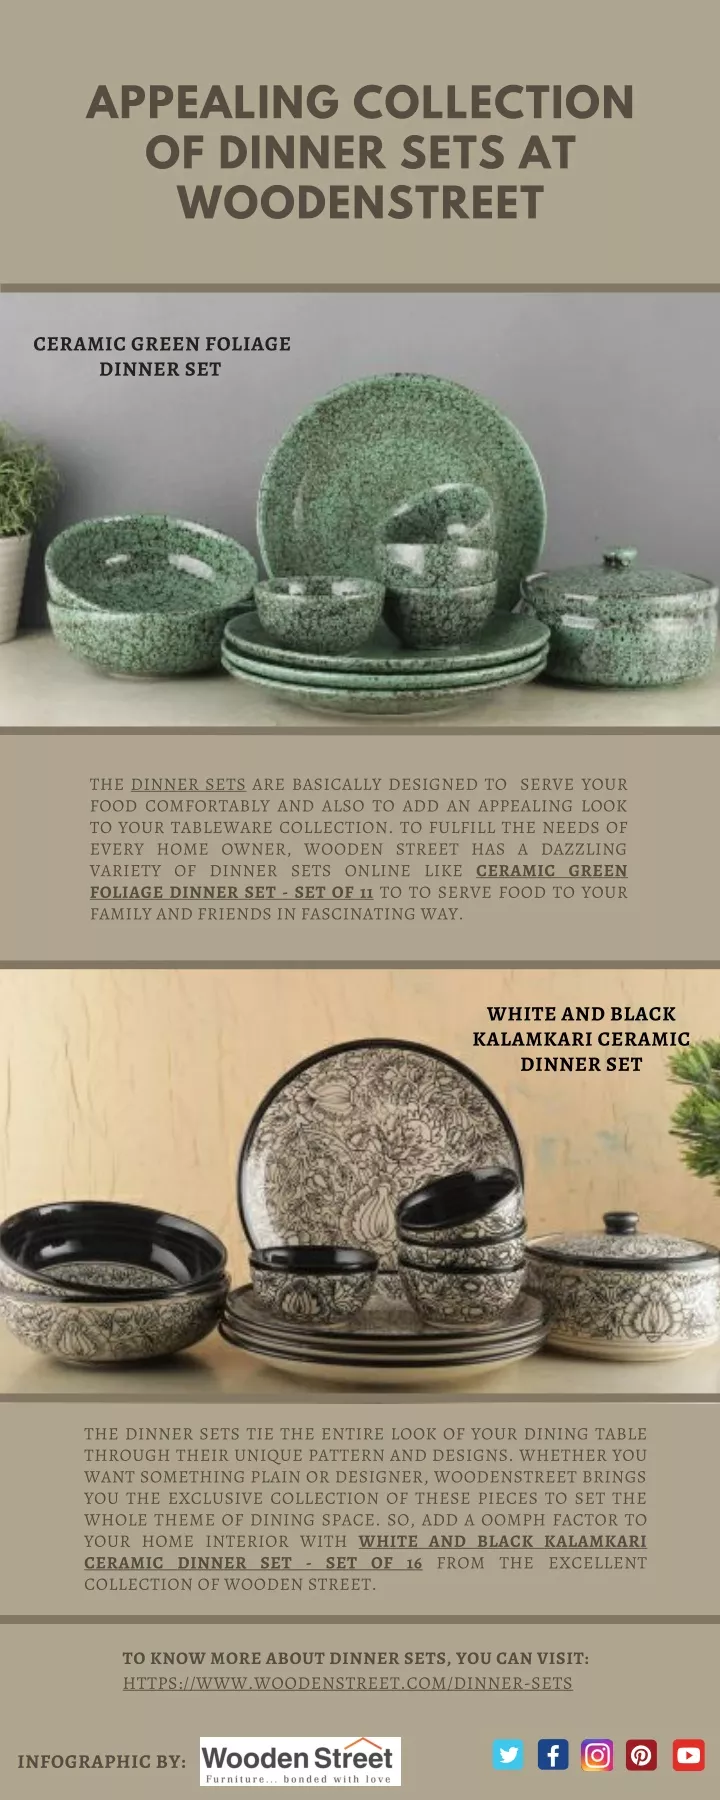 appealing collection of dinner sets